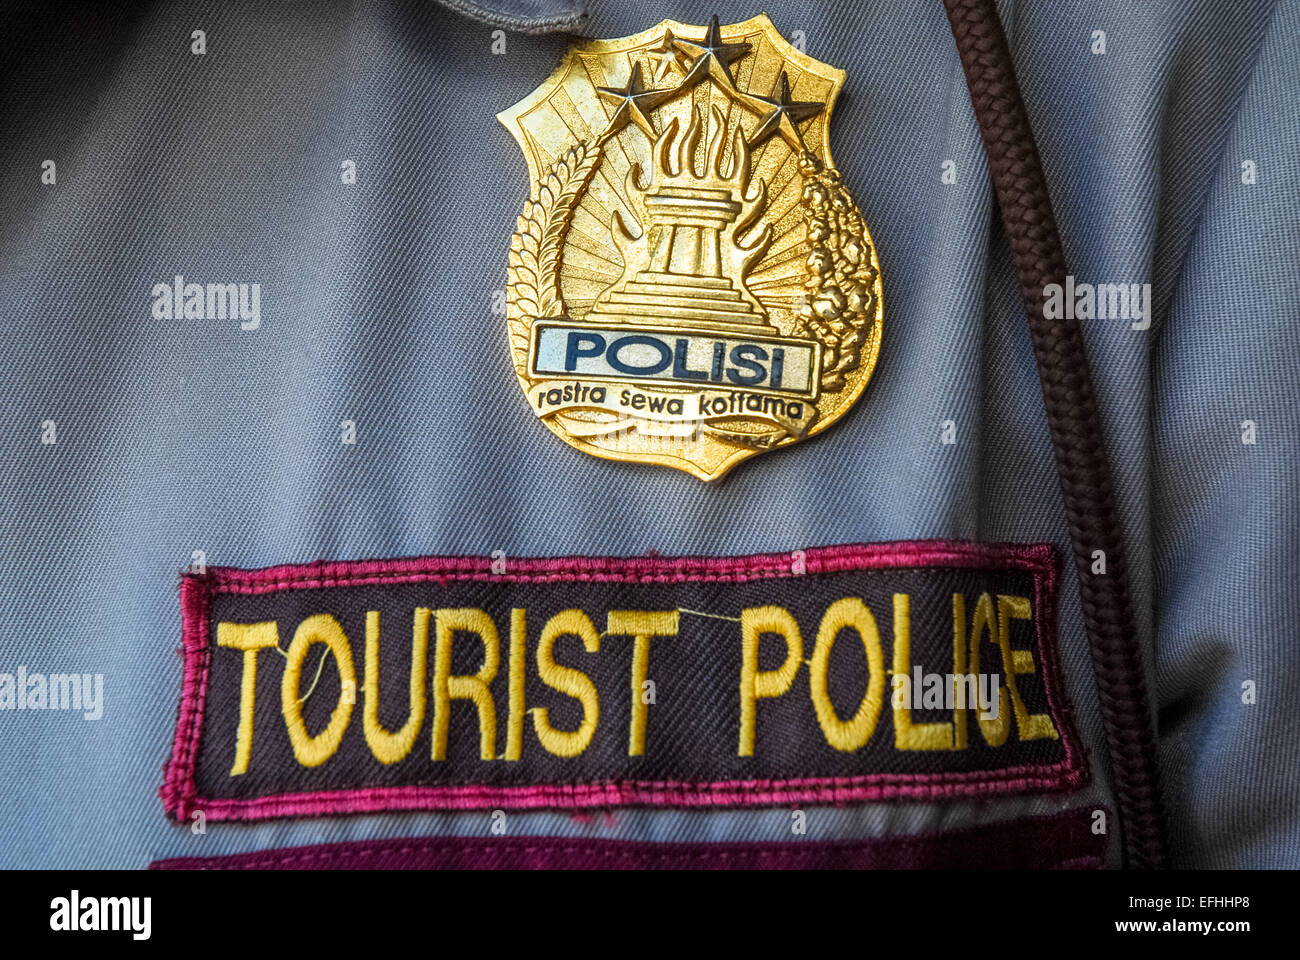 badge of tourist police officer in bali indonesia Stock Photo